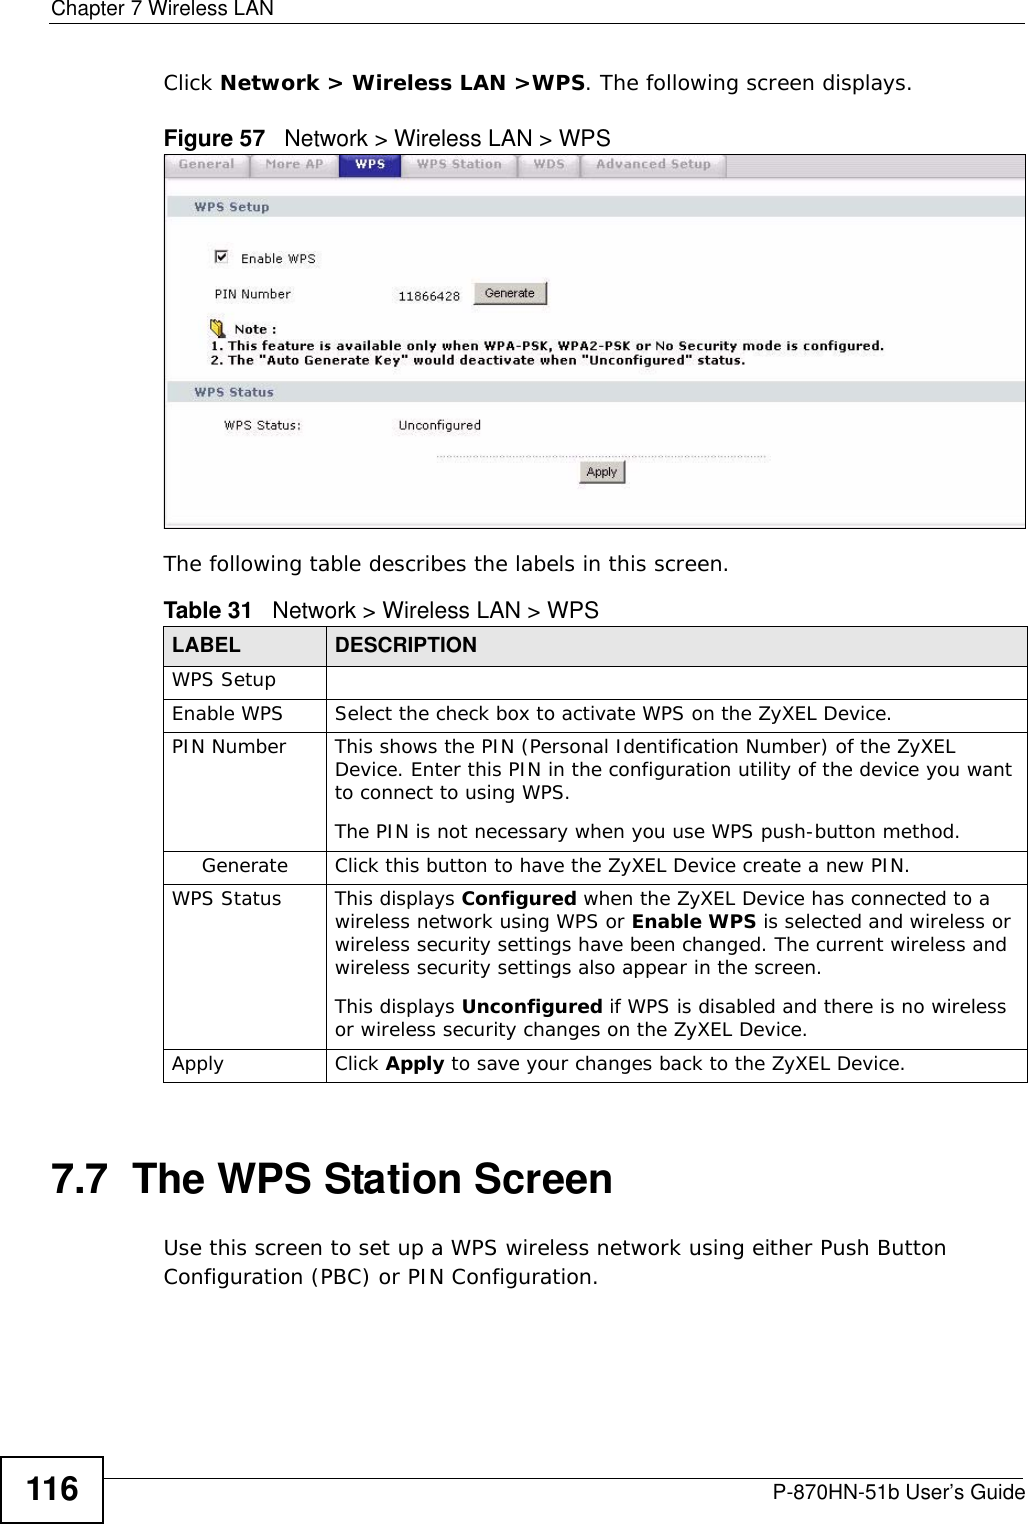 Chapter 7 Wireless LANP-870HN-51b User’s Guide116Click Network &gt; Wireless LAN &gt;WPS. The following screen displays.Figure 57   Network &gt; Wireless LAN &gt; WPSThe following table describes the labels in this screen.7.7  The WPS Station Screen Use this screen to set up a WPS wireless network using either Push Button Configuration (PBC) or PIN Configuration.Table 31   Network &gt; Wireless LAN &gt; WPSLABEL DESCRIPTIONWPS SetupEnable WPS Select the check box to activate WPS on the ZyXEL Device.PIN Number This shows the PIN (Personal Identification Number) of the ZyXEL Device. Enter this PIN in the configuration utility of the device you want to connect to using WPS.The PIN is not necessary when you use WPS push-button method.Generate Click this button to have the ZyXEL Device create a new PIN. WPS Status This displays Configured when the ZyXEL Device has connected to a wireless network using WPS or Enable WPS is selected and wireless or wireless security settings have been changed. The current wireless and wireless security settings also appear in the screen.This displays Unconfigured if WPS is disabled and there is no wireless or wireless security changes on the ZyXEL Device.Apply Click Apply to save your changes back to the ZyXEL Device.